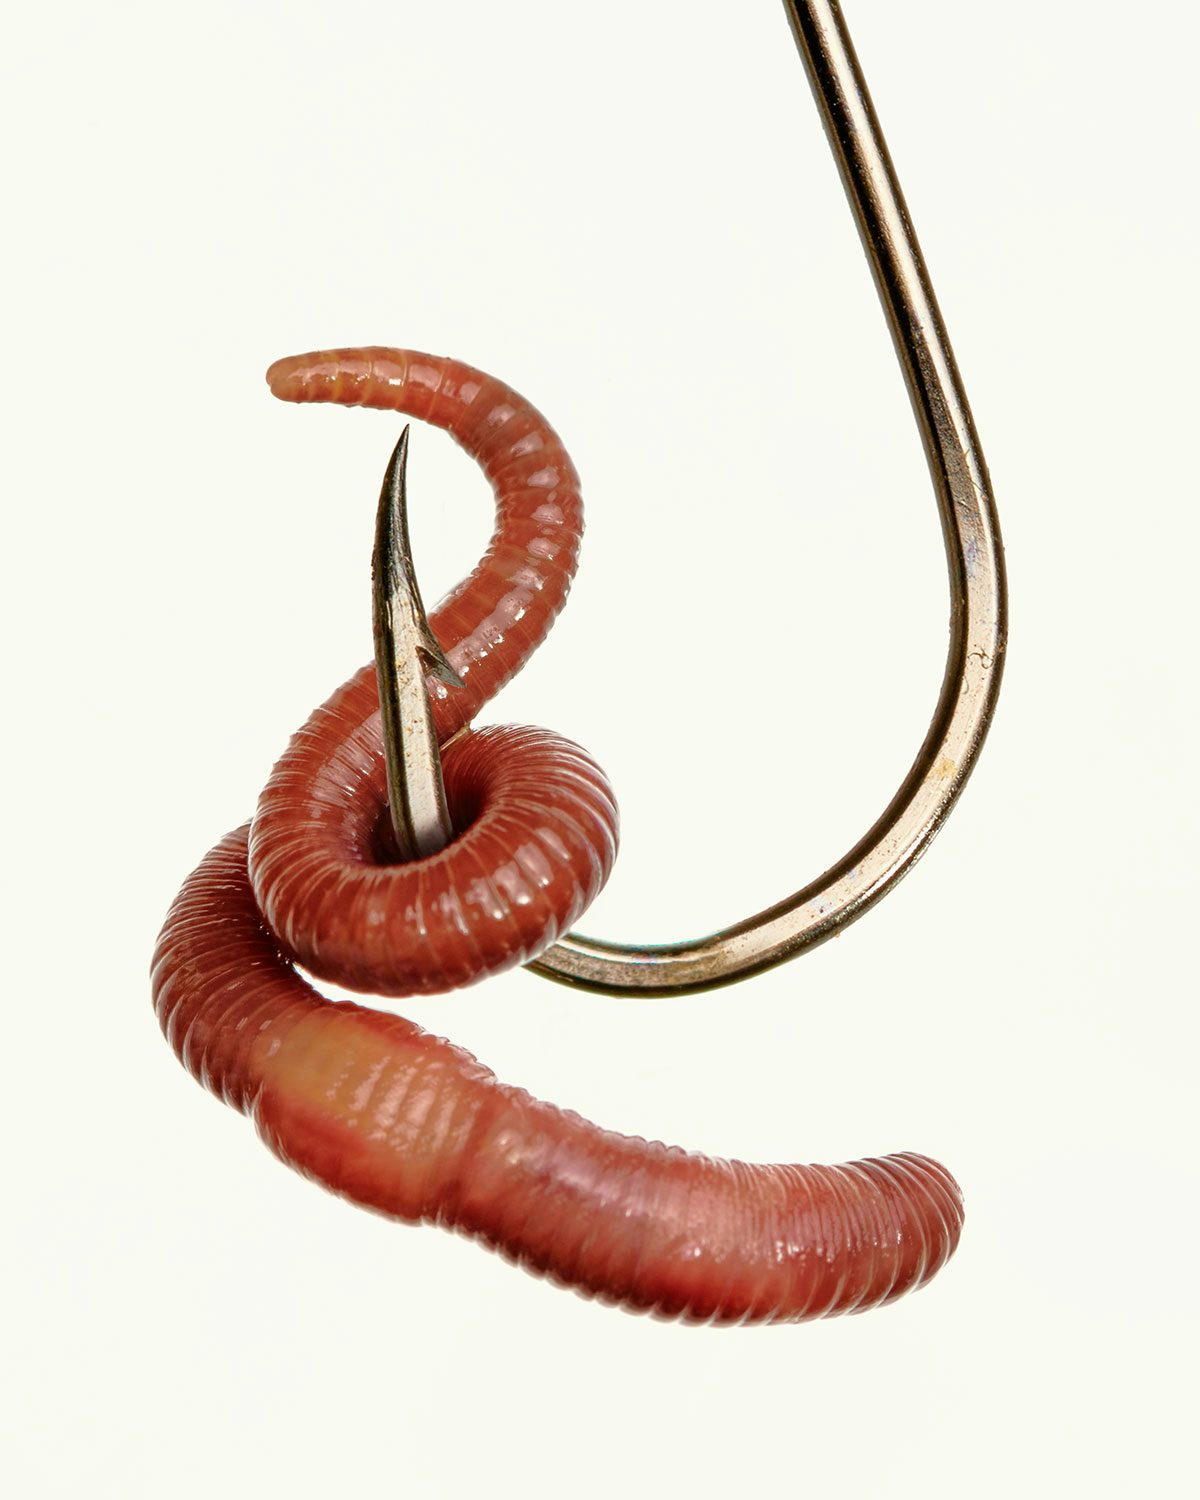 A close up image of a worm wrapped around a fish hook